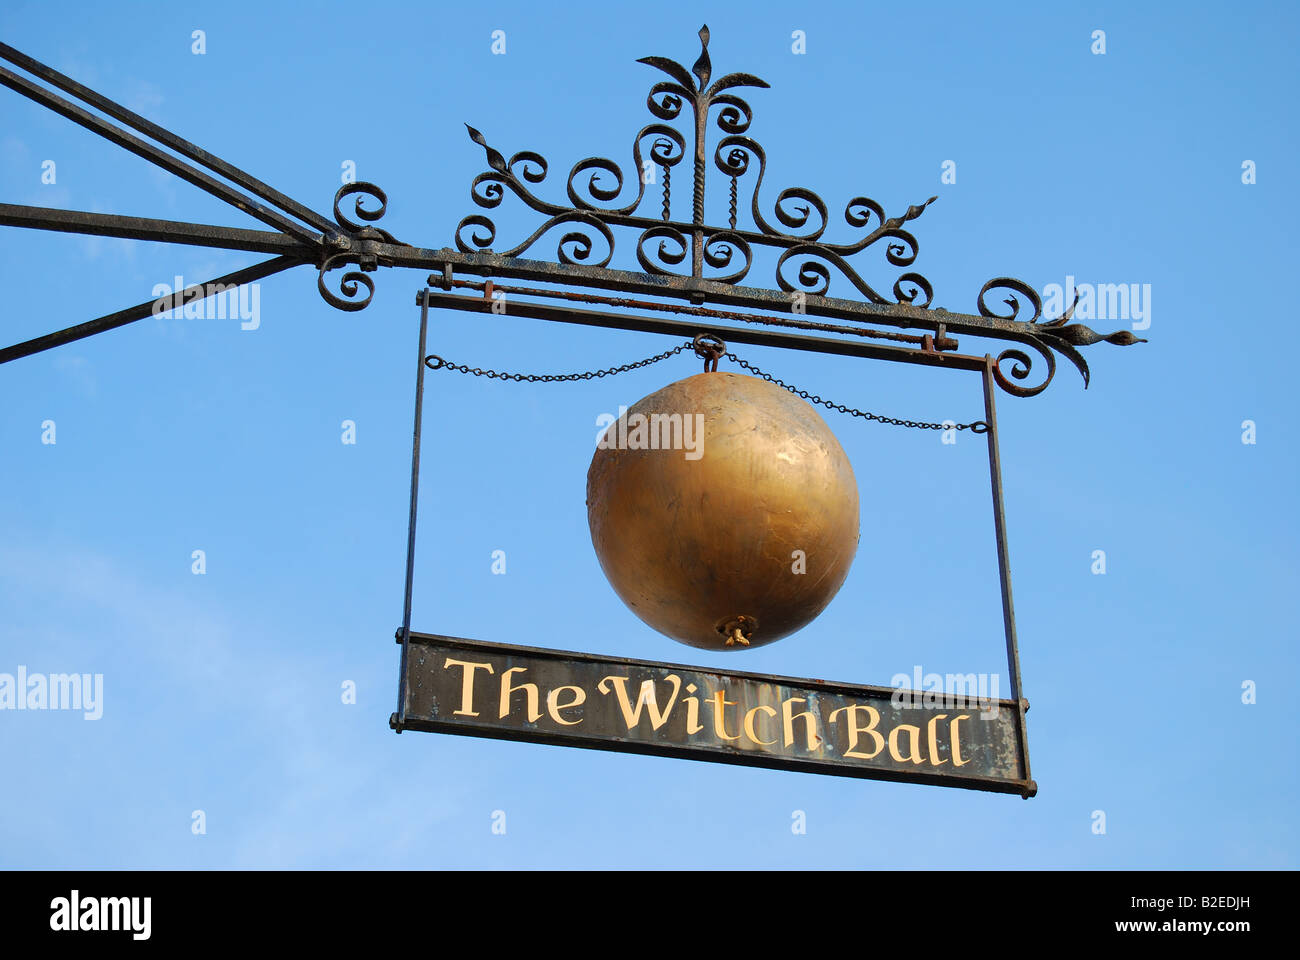 The Witch Ball sign, High Street, Thame, Oxfordshire, England, United Kingdom Stock Photo